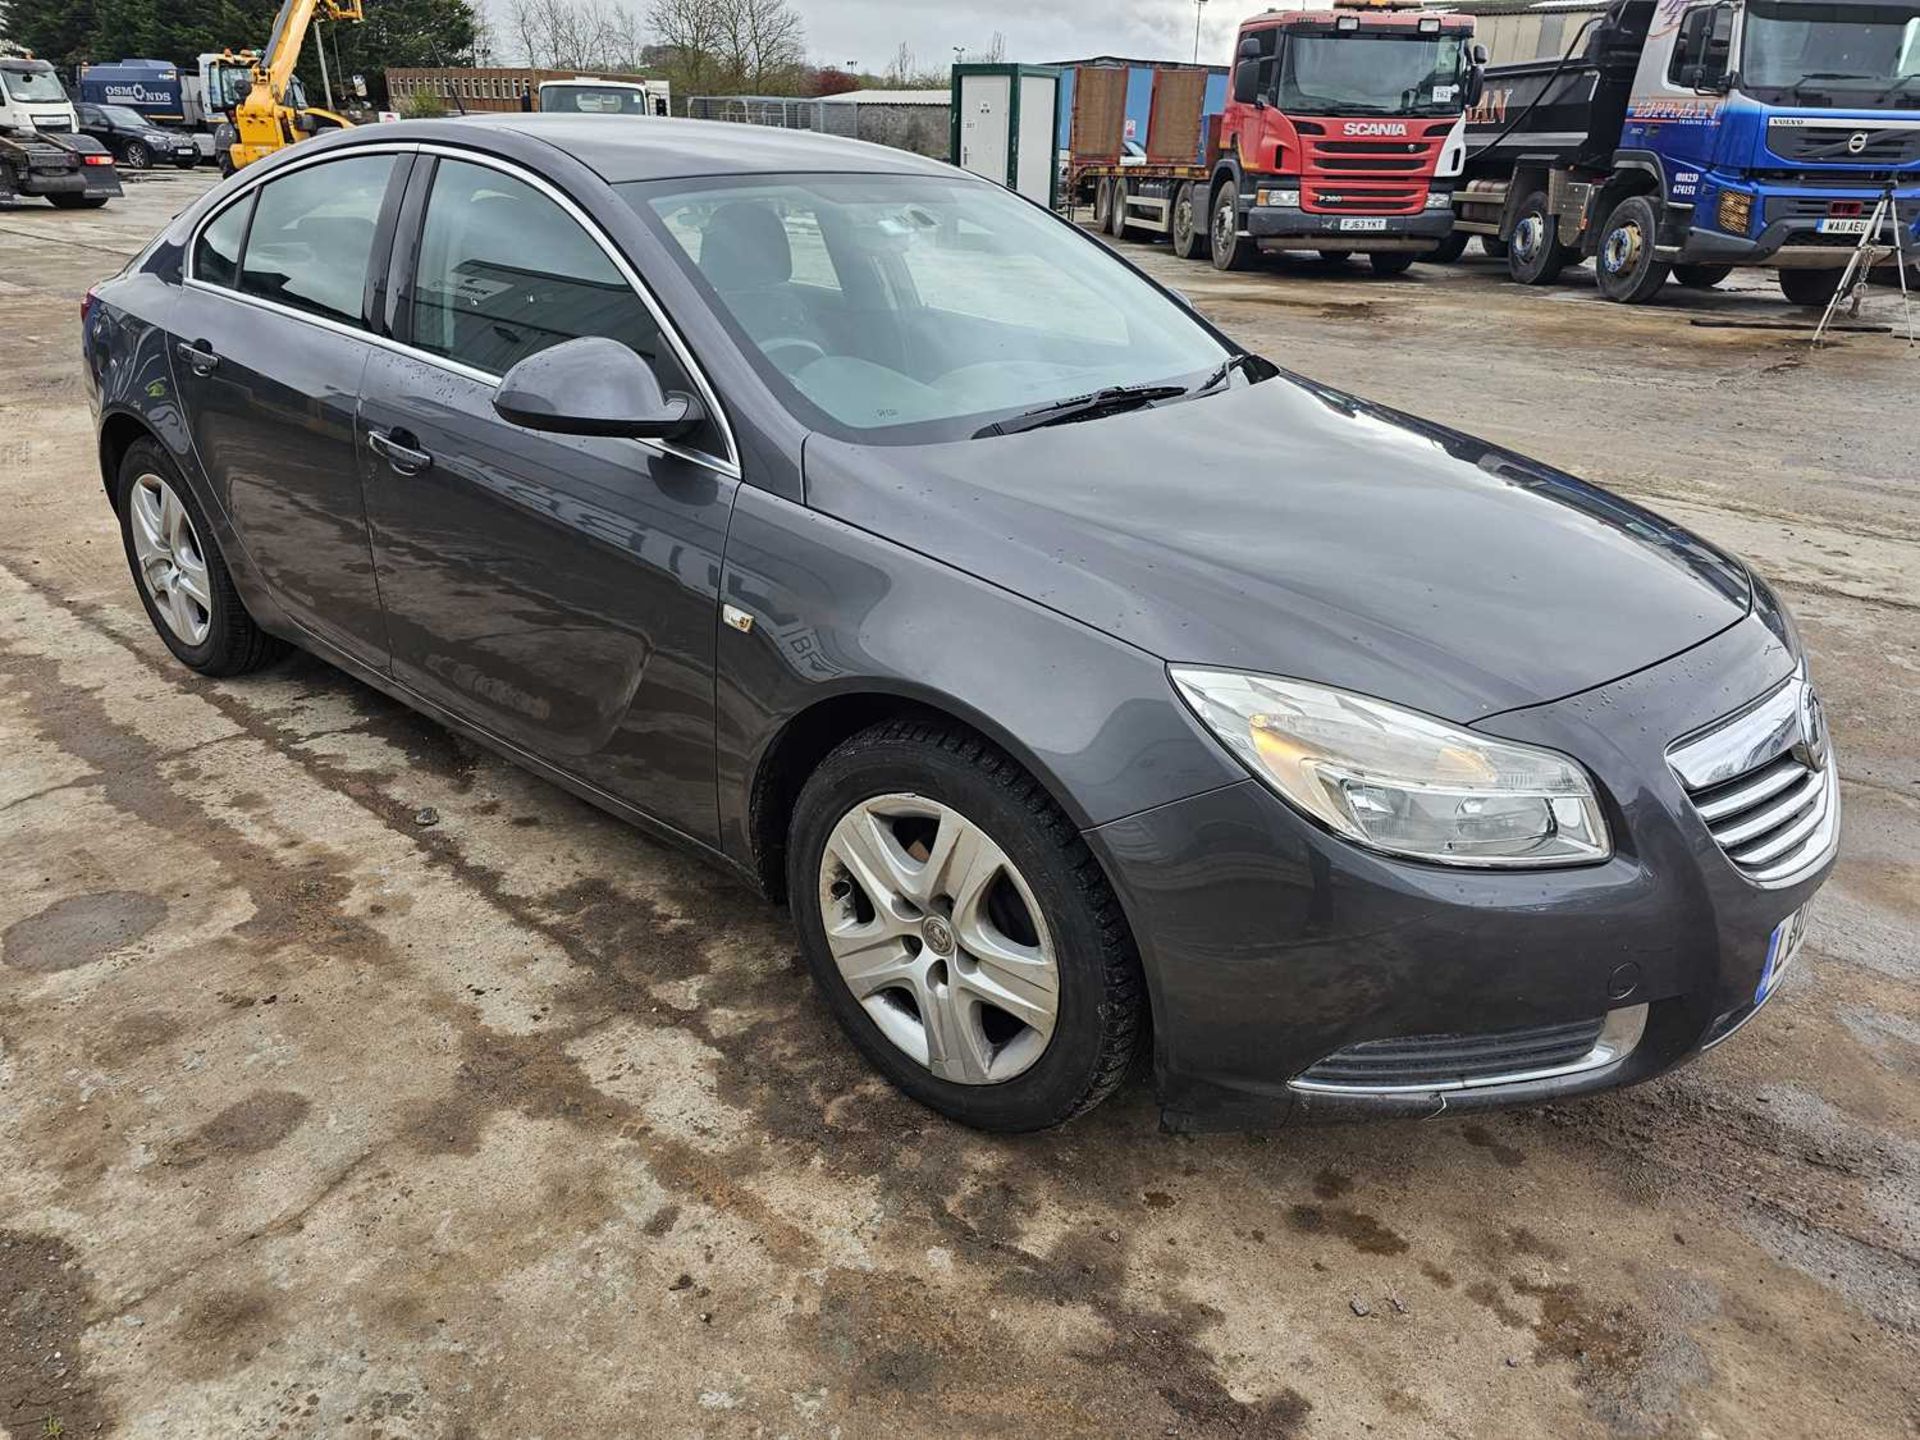 2009 Vauxhall Insignia Exclusive, 6 Speed, Bluetooth, Cruise Control, A/C (Reg. Docs. Available) - Image 7 of 26